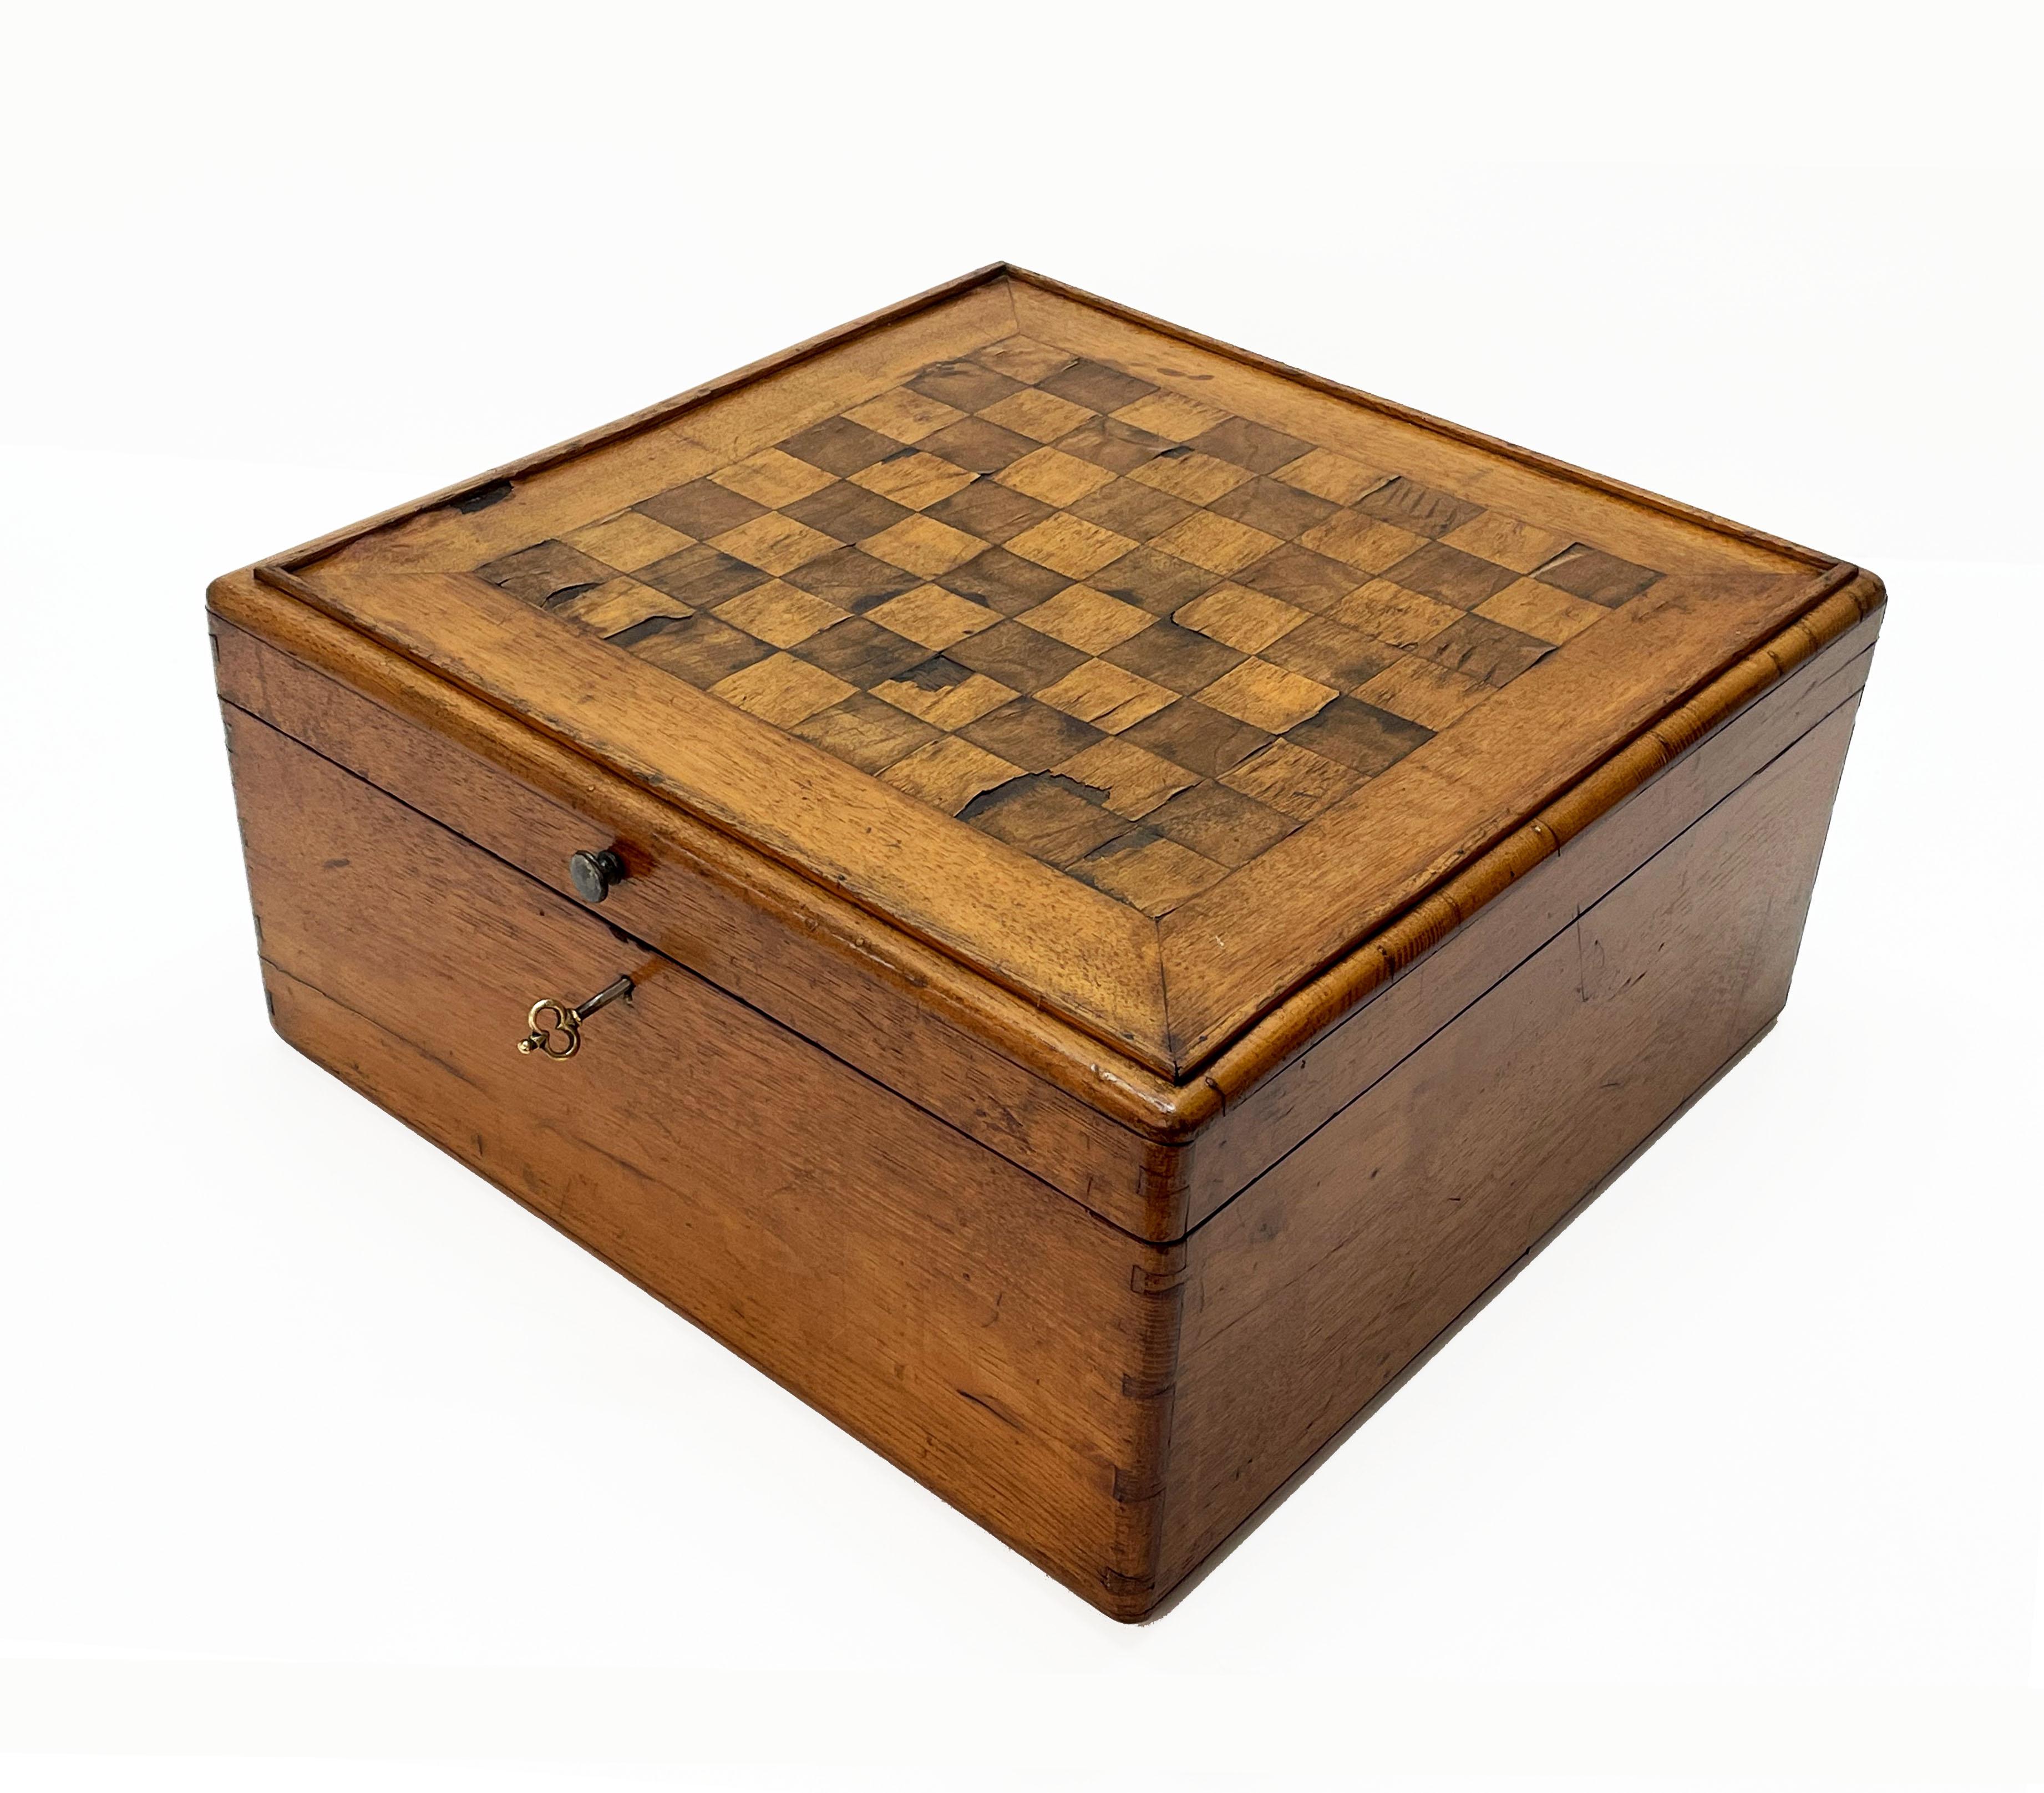 Early 20th Century Large Wooden Inlaid Squared Italian Chessboard Box, 1900s For Sale 1